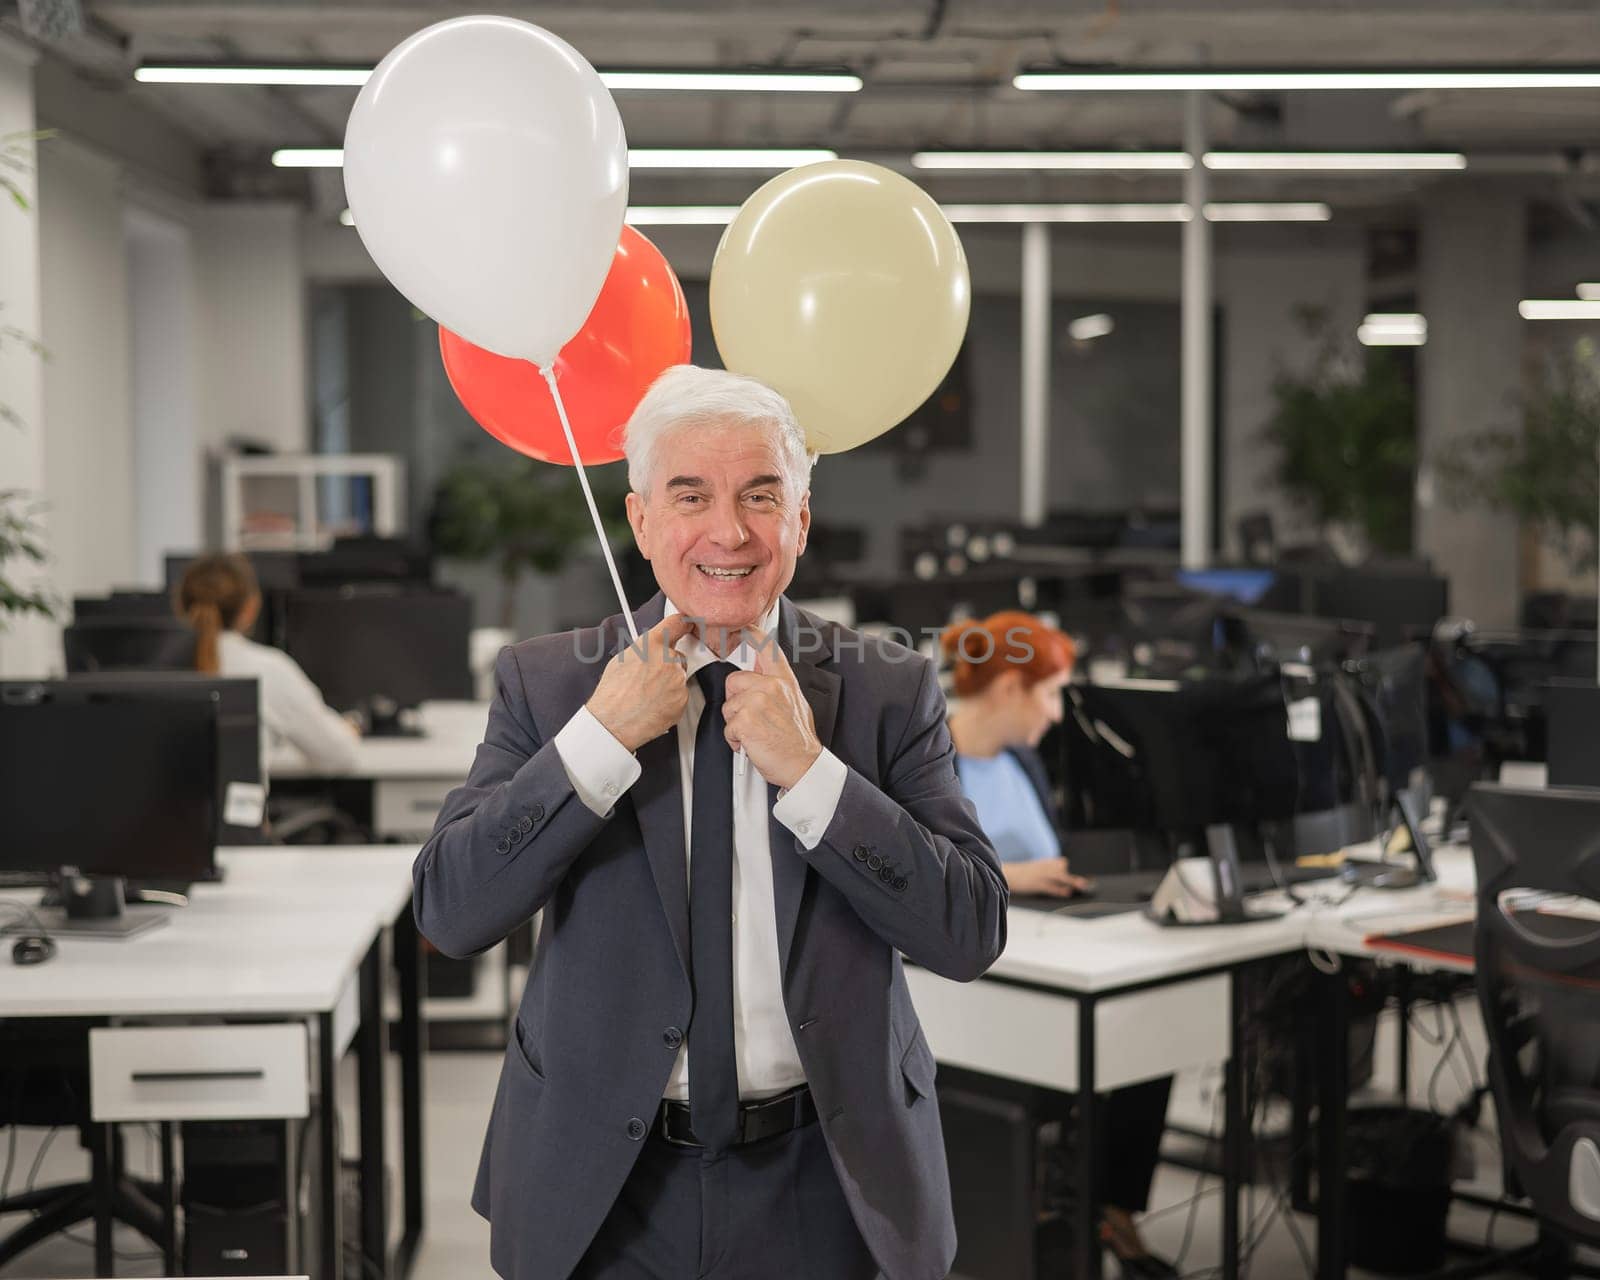 Portrait of a cheerful mature business man holding balloons in the office